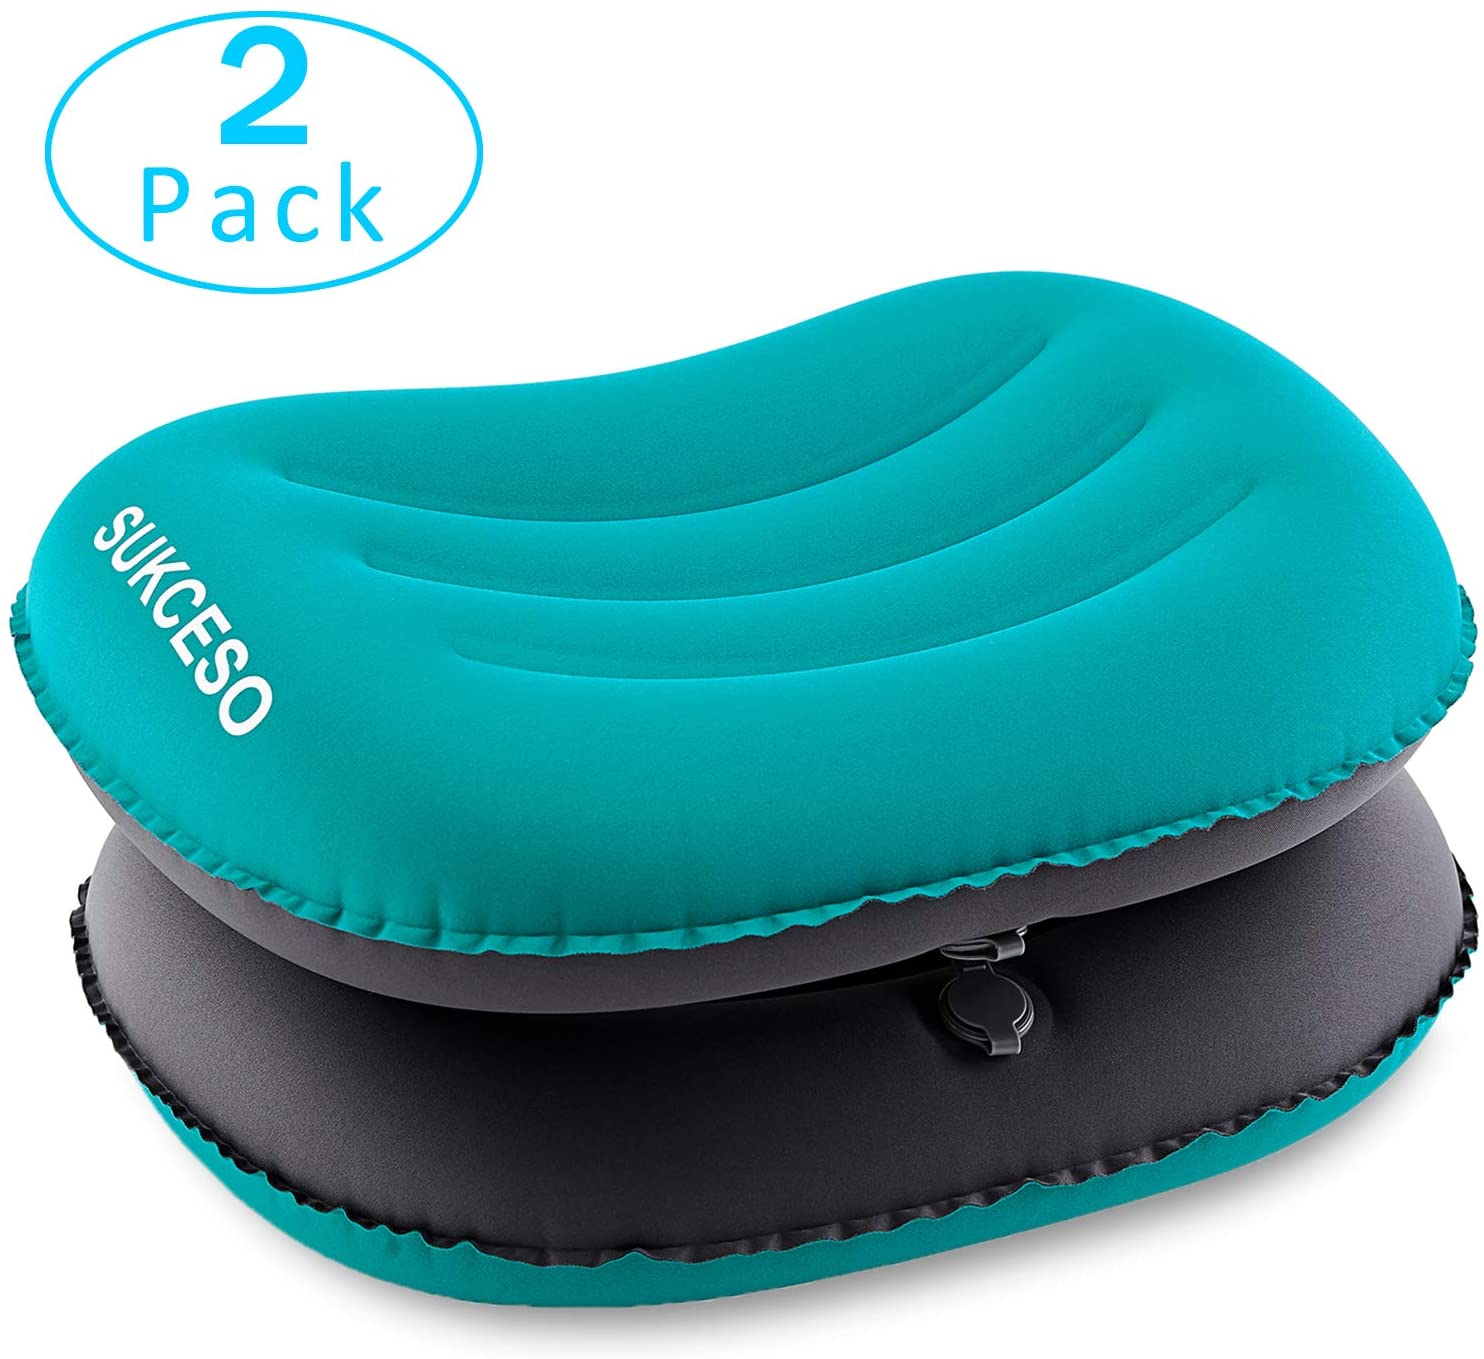 SUKCESO Ultralight Inflatable Camping Pillow, 2-Pack